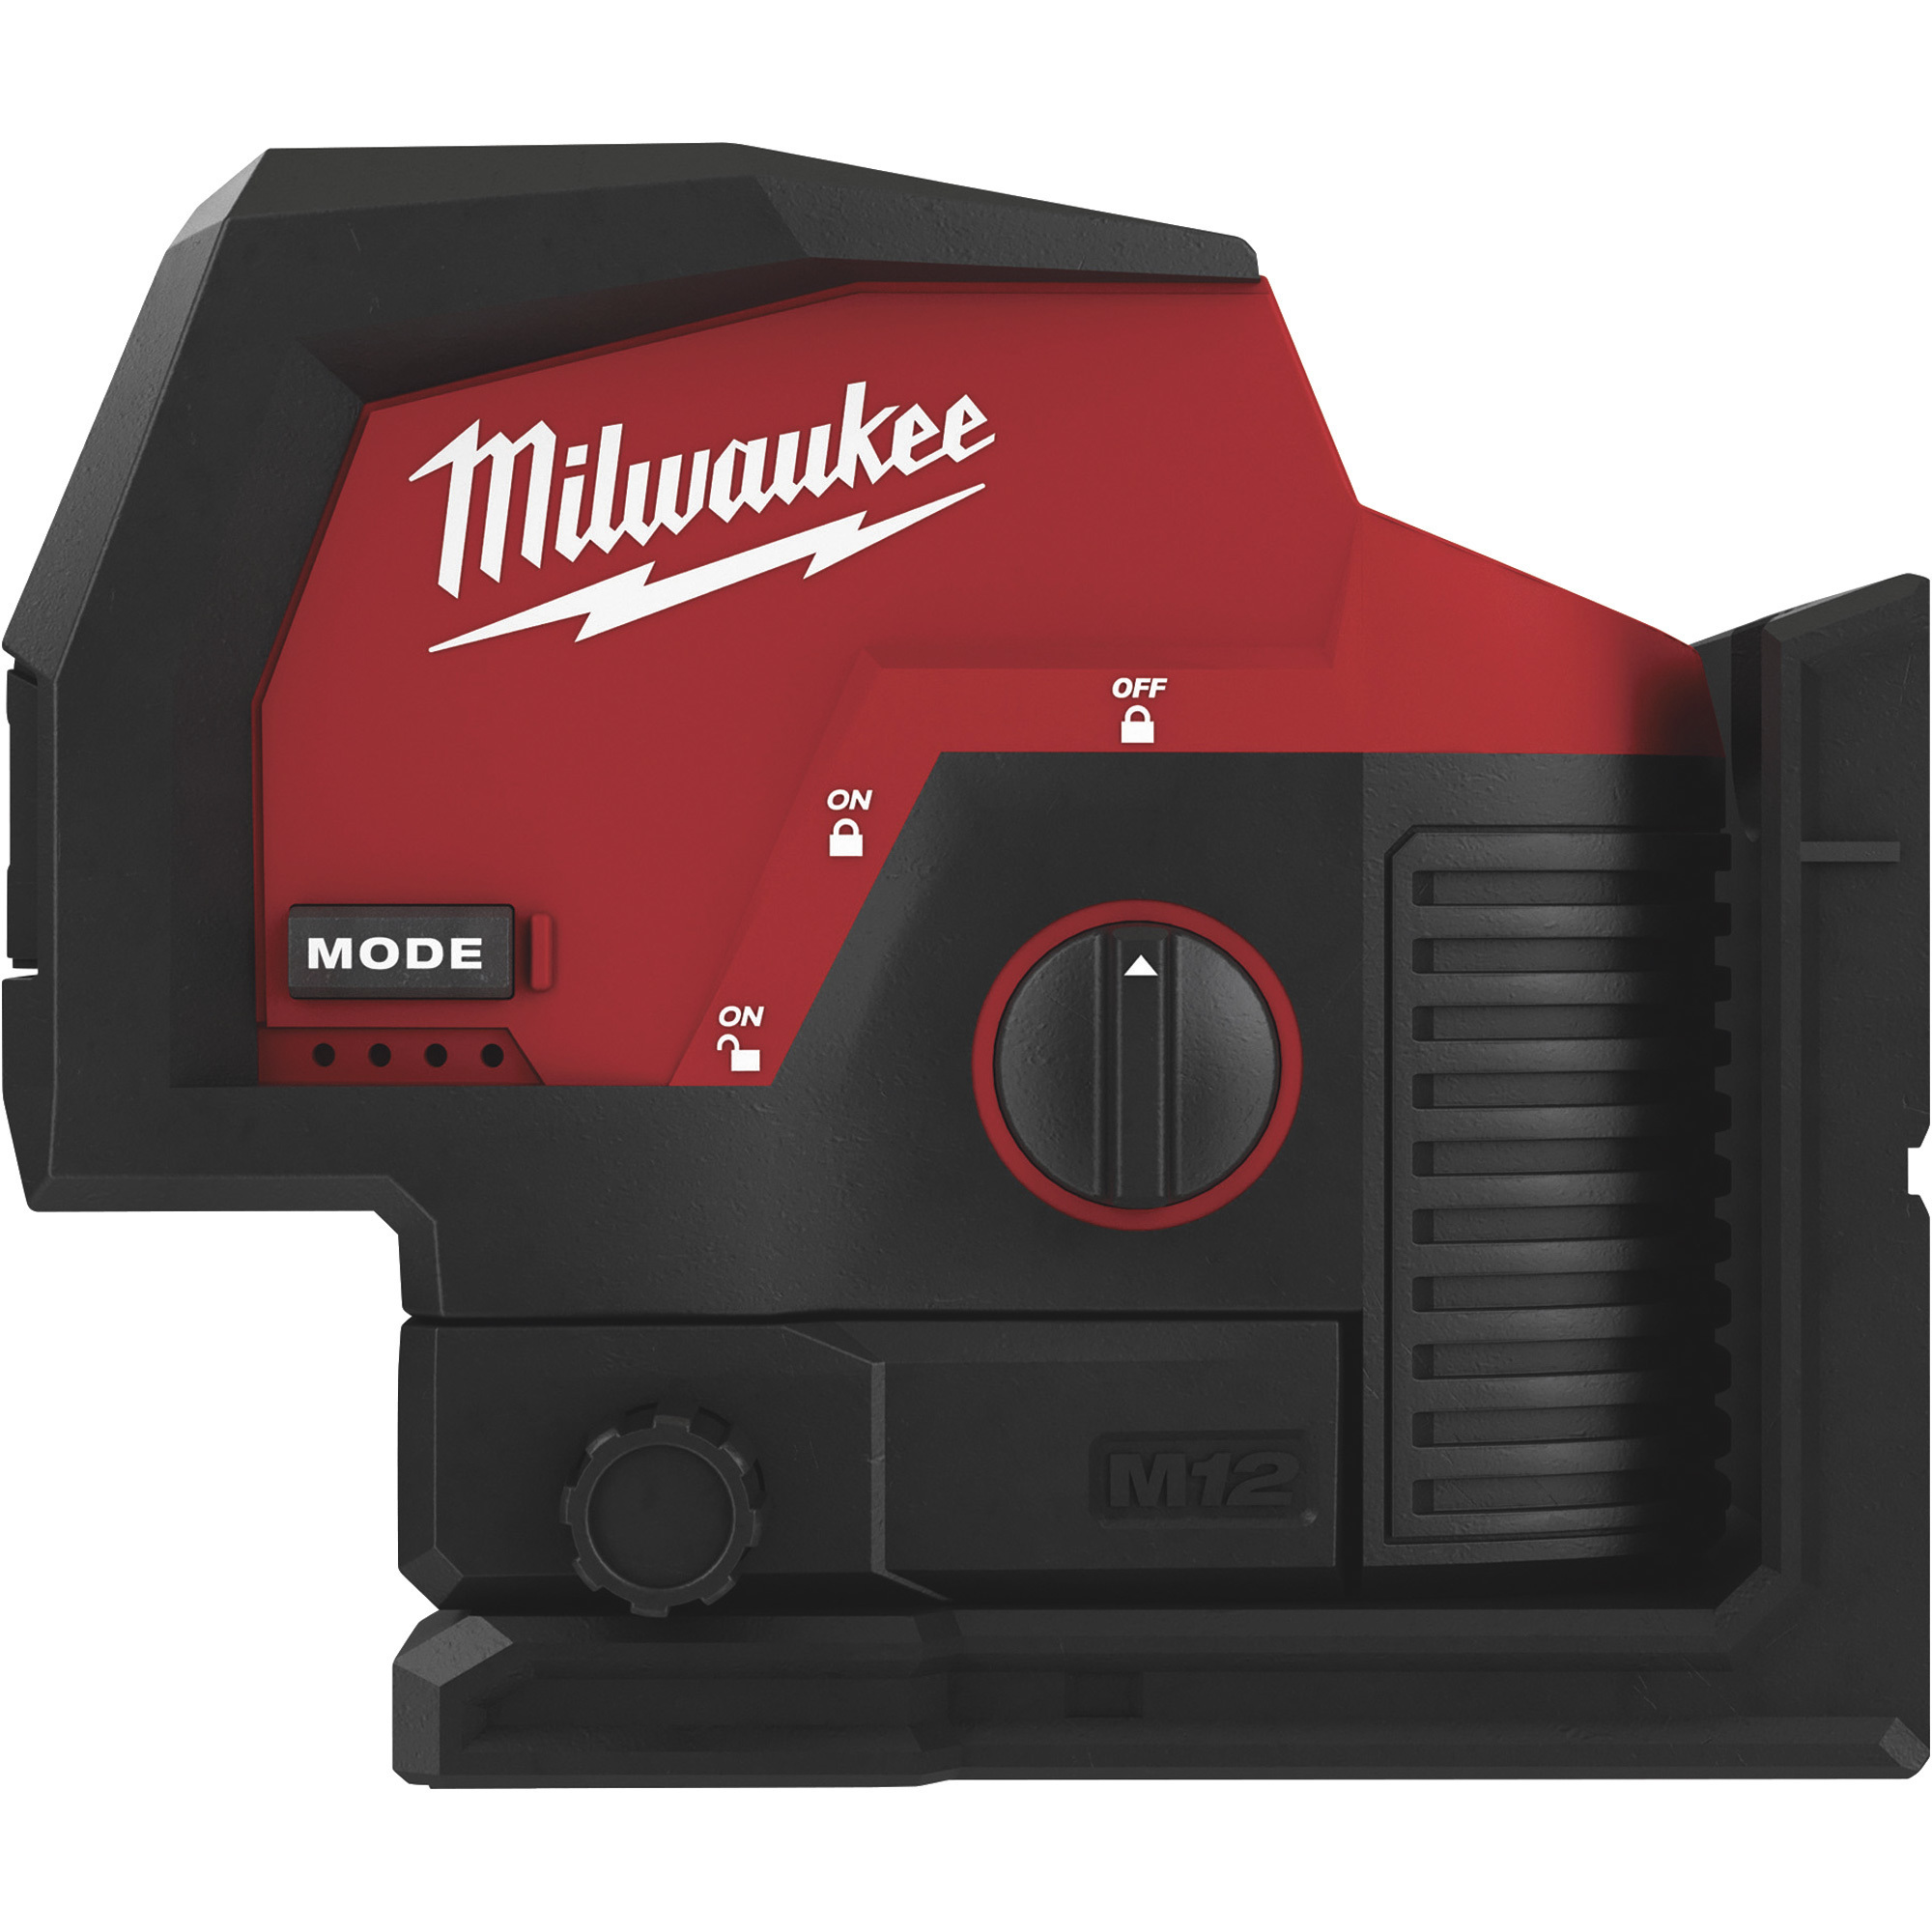 Milwaukee M12 Rechargeable Green Cross Line and Plumb Points Laser, Tool Only, Model 3622-20